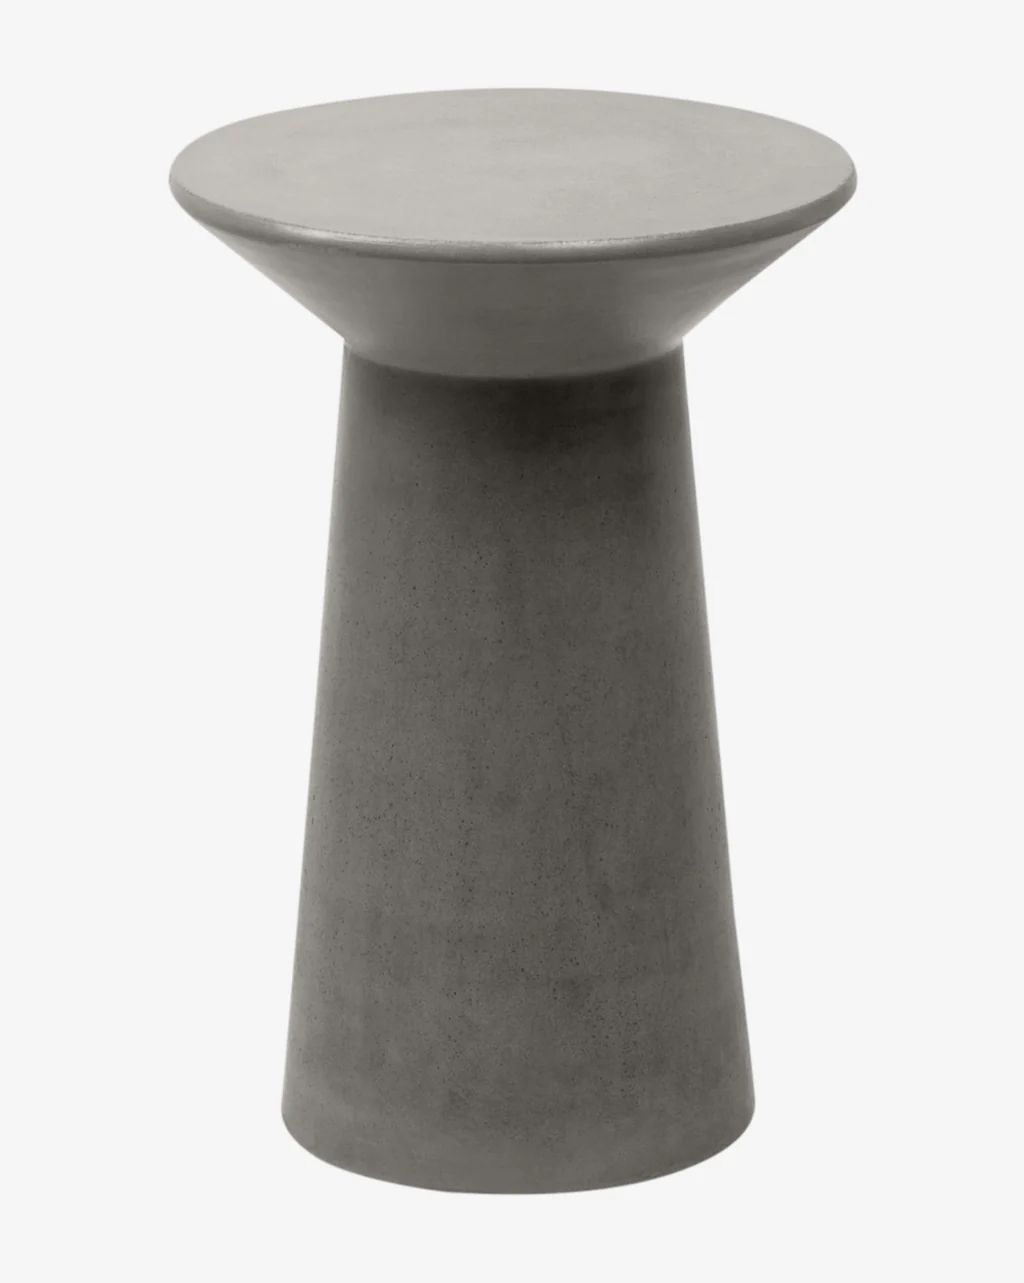 Brayson Accent Table | McGee & Co.